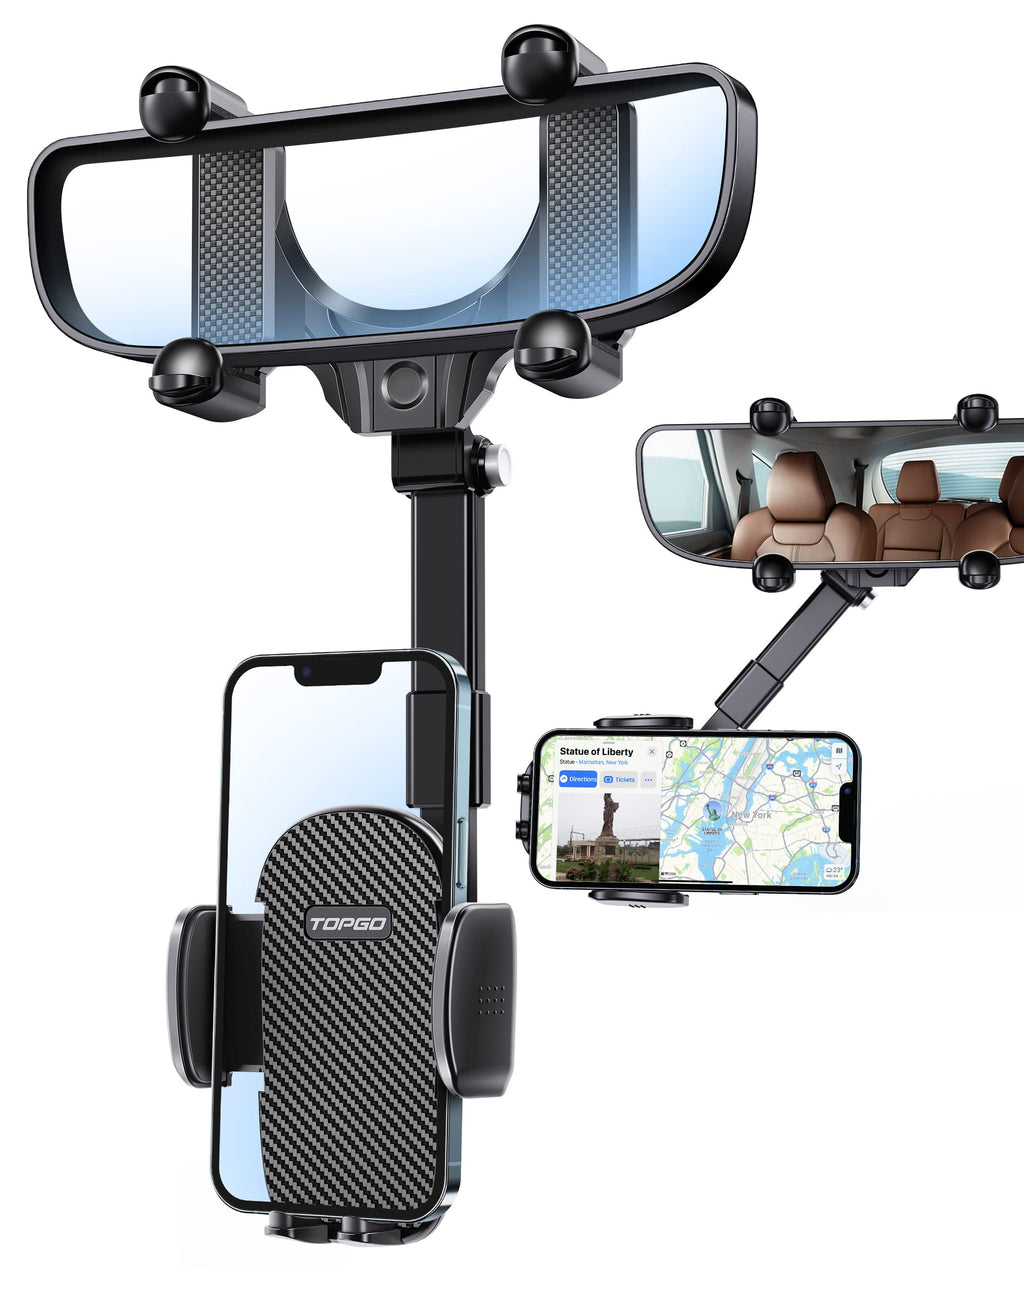  [AUSTRALIA] - Rotatable and Retractable Car Phone Holder- Rear View Mirror Phone Holder, TOPGO Upgrade Adjustable Car Phone Holder Mount for iPhone, Samsung and All Smartphones